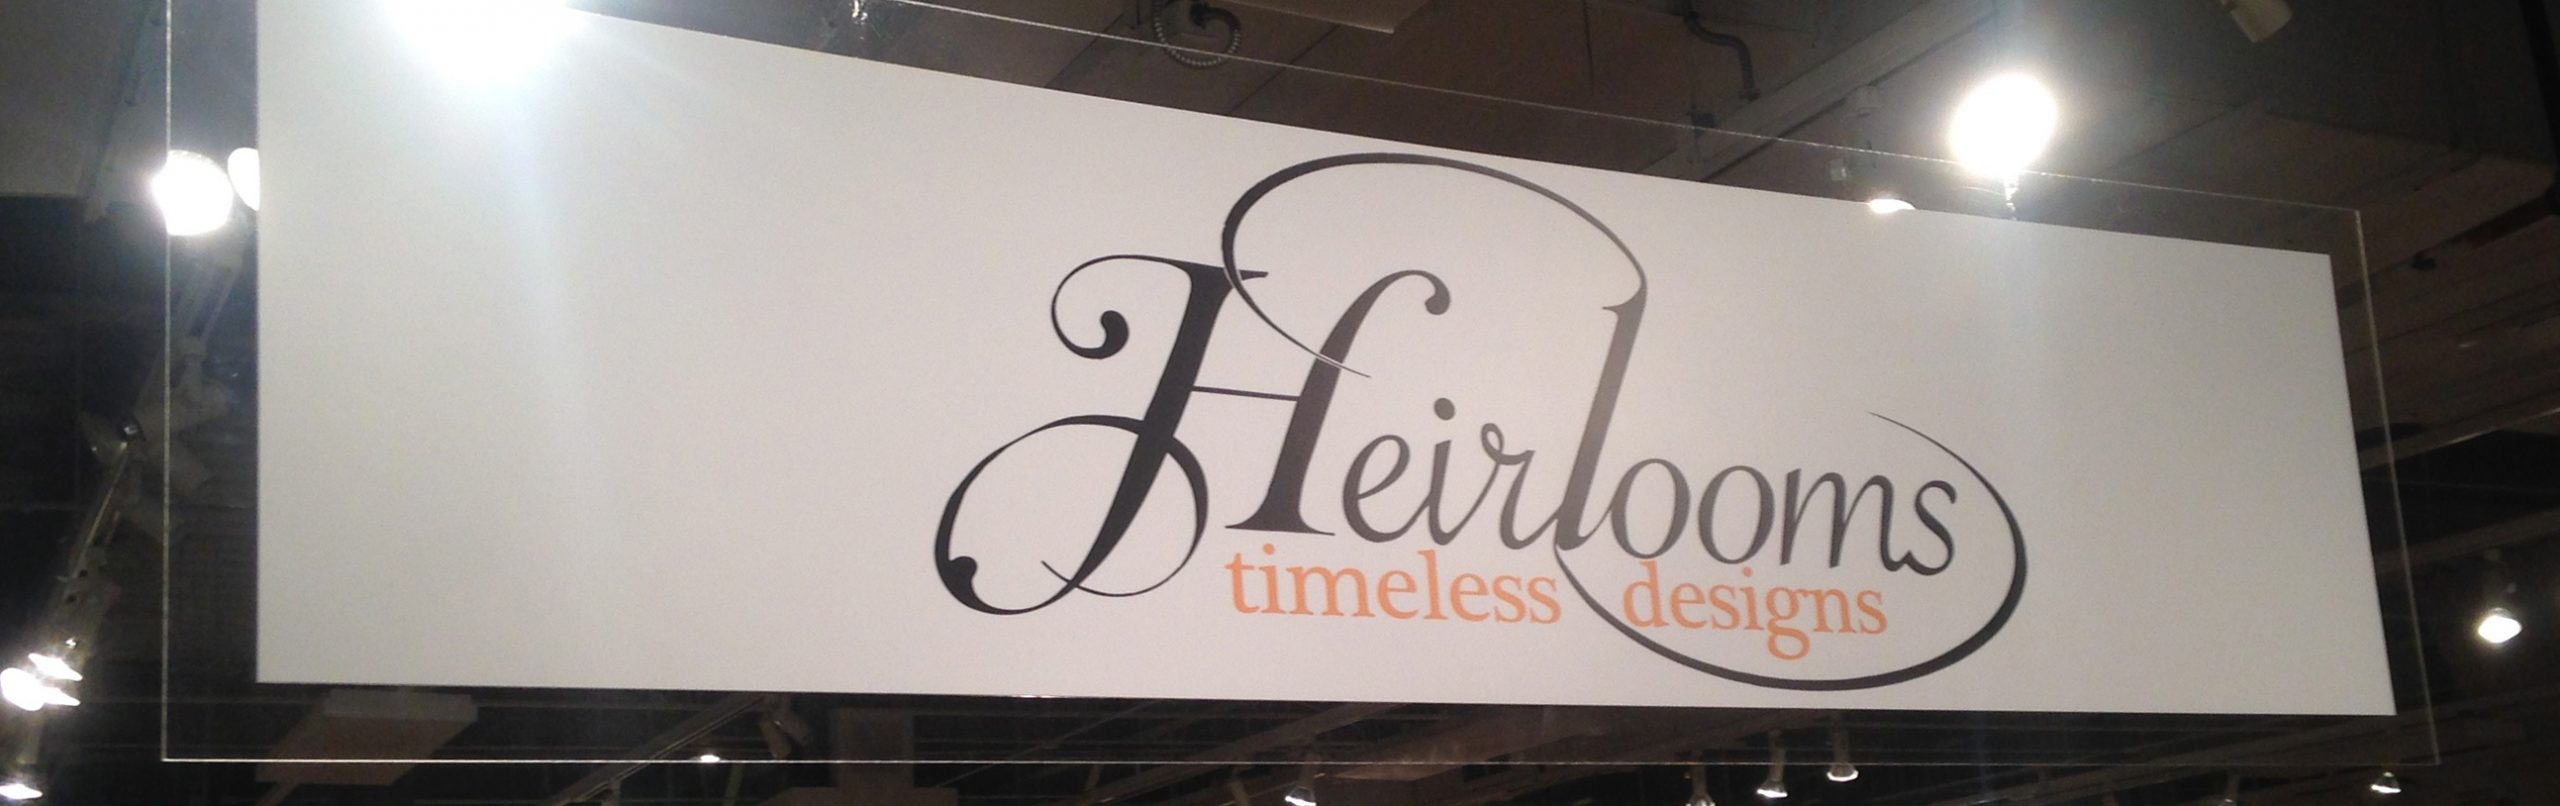 Heirlooms_timeless_designs_sign